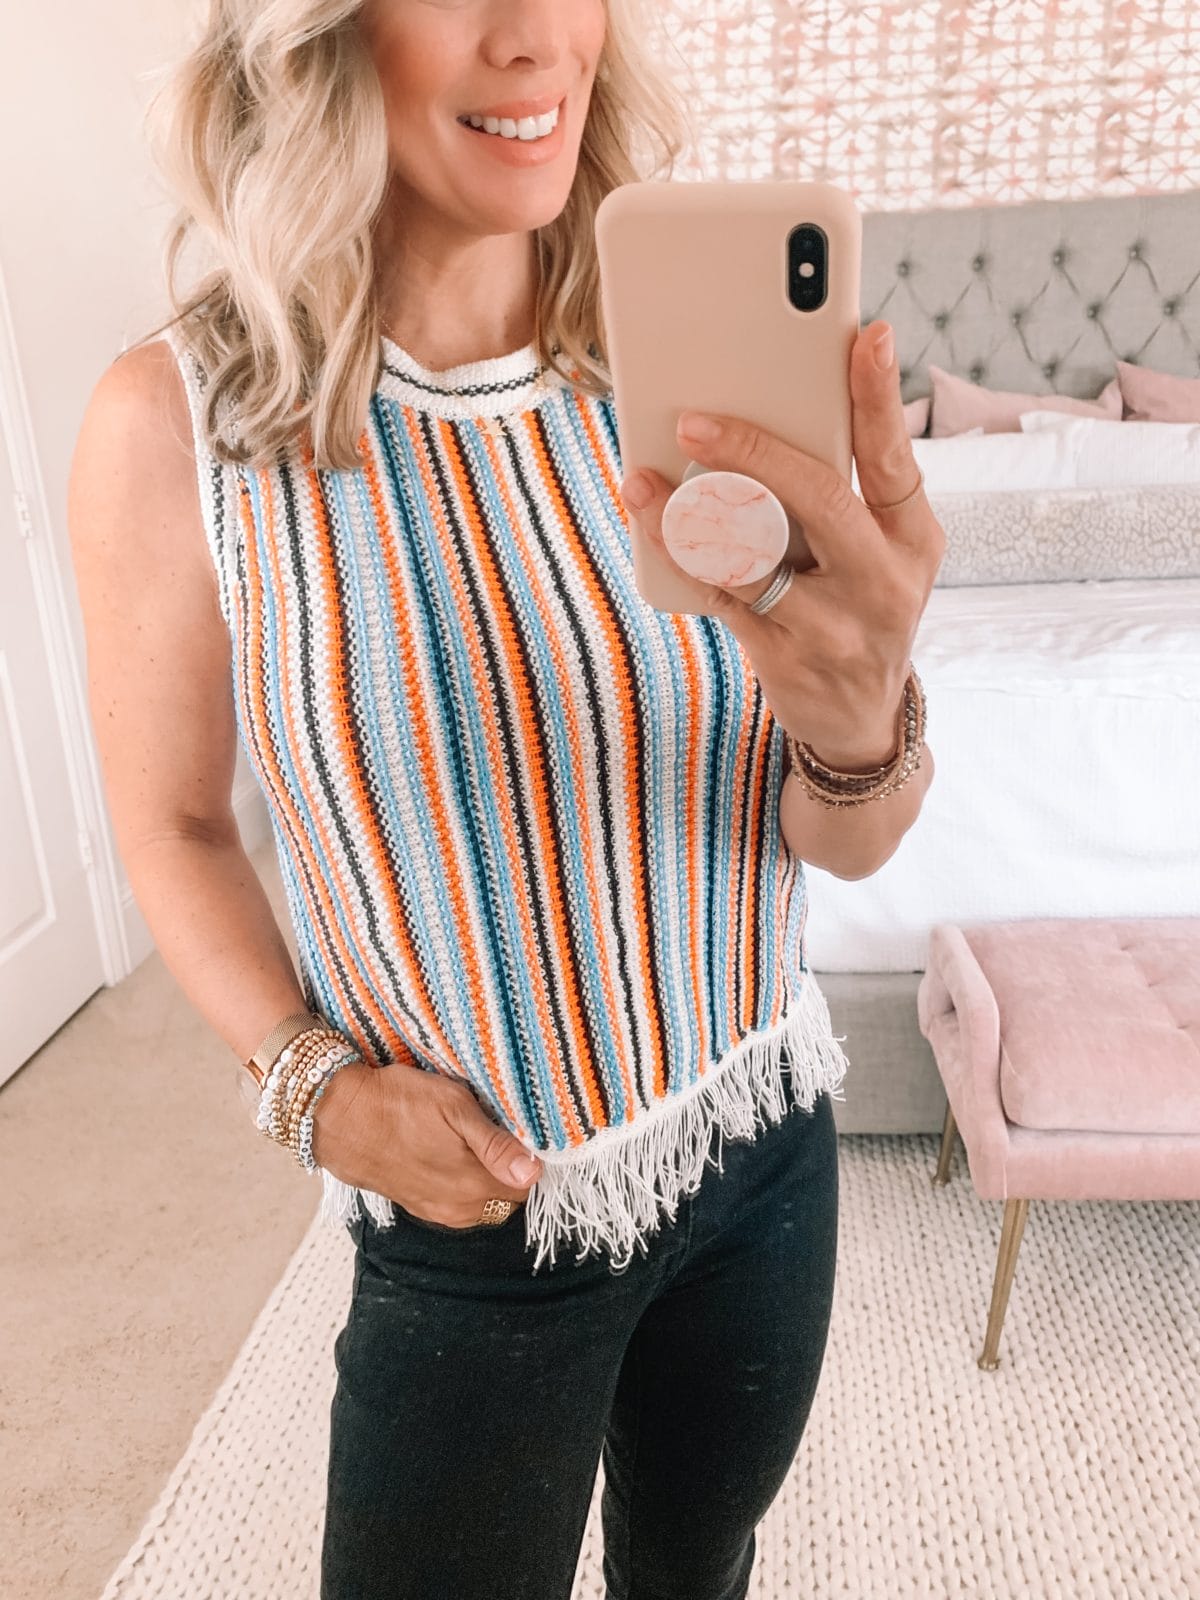 Loft Dressing Room, Striped Sweater Tank with Fringe, Jeans